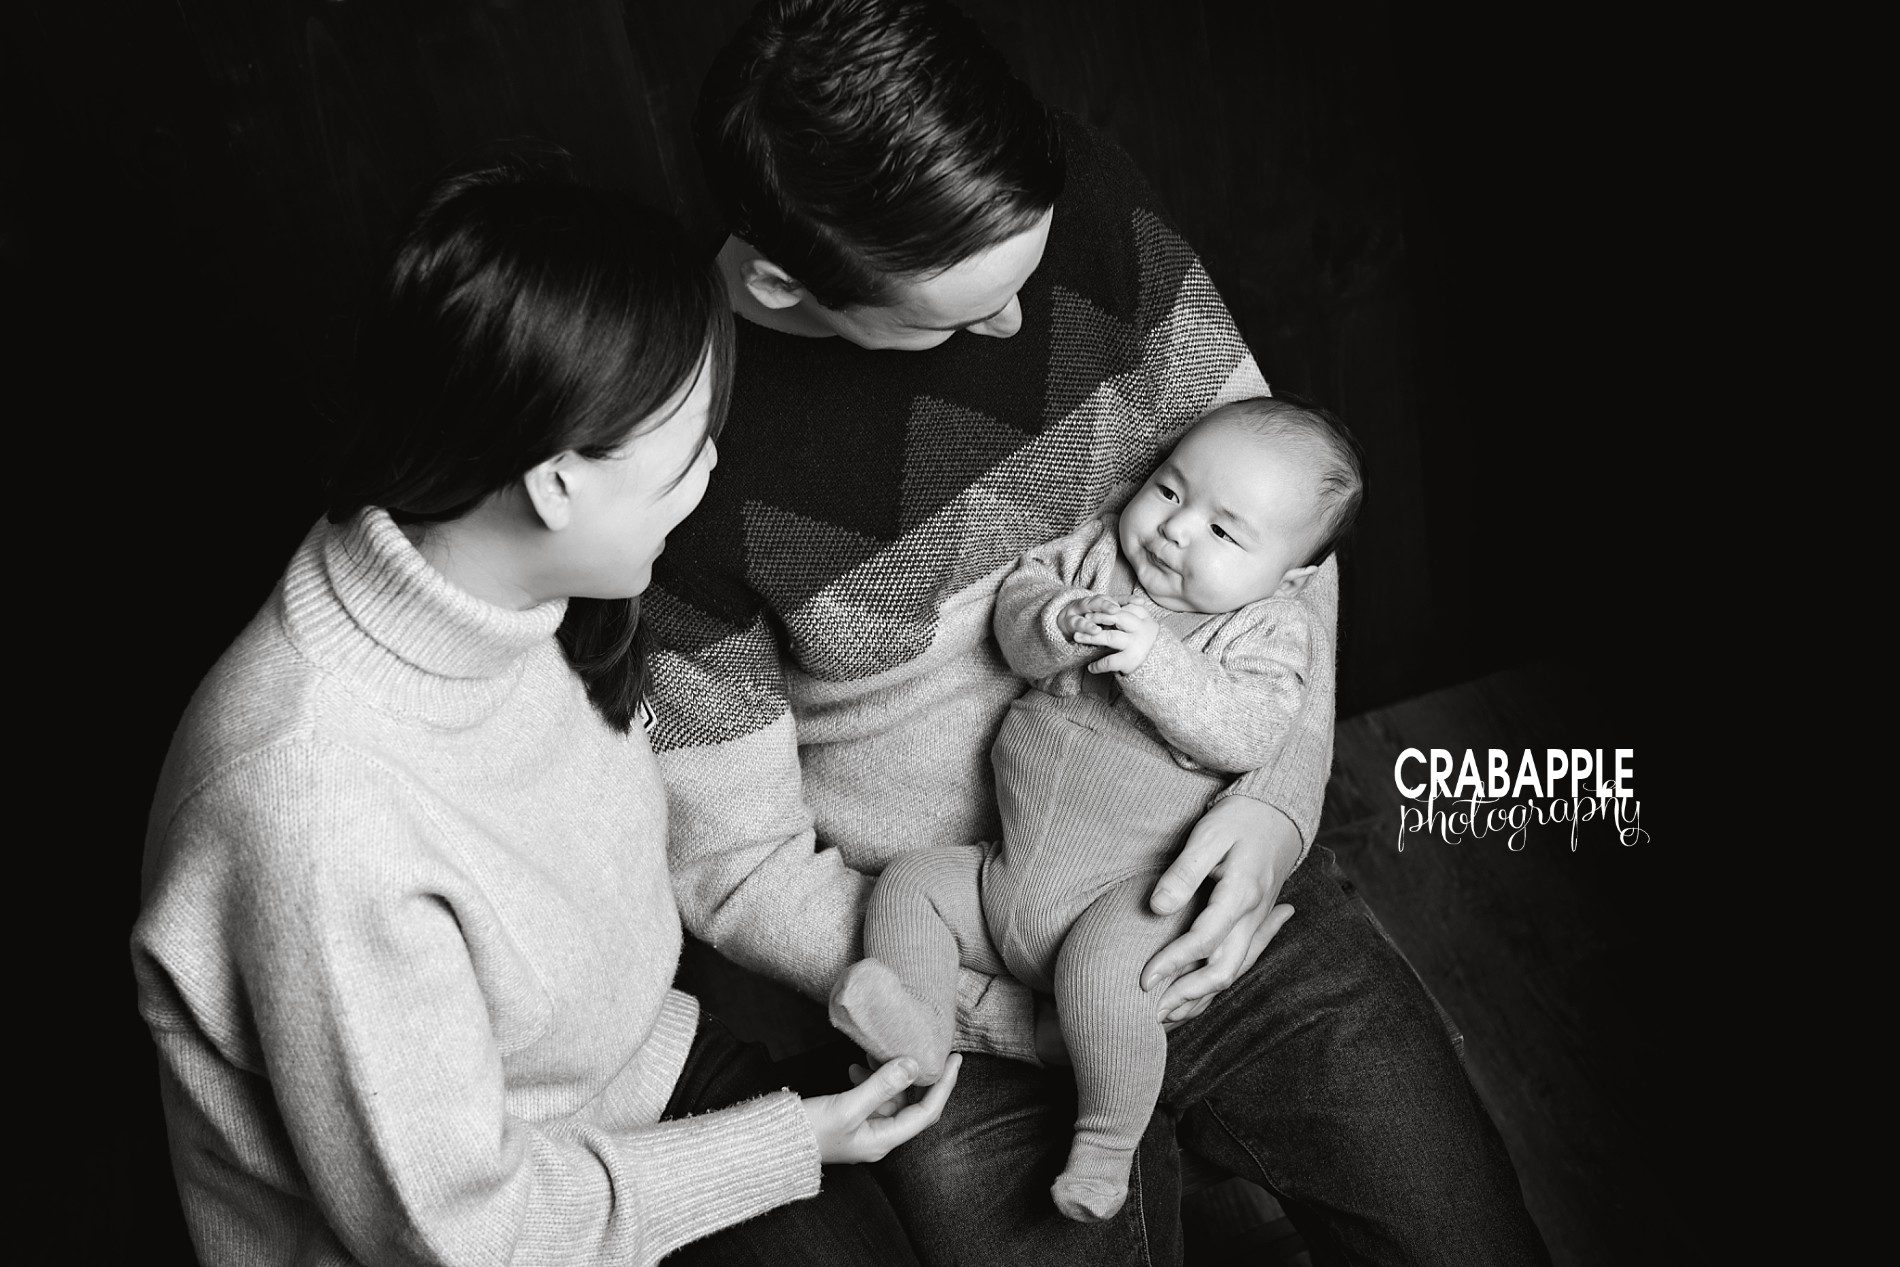 Black and white family photo inspiration of mom, dad, and baby boy taken from above.